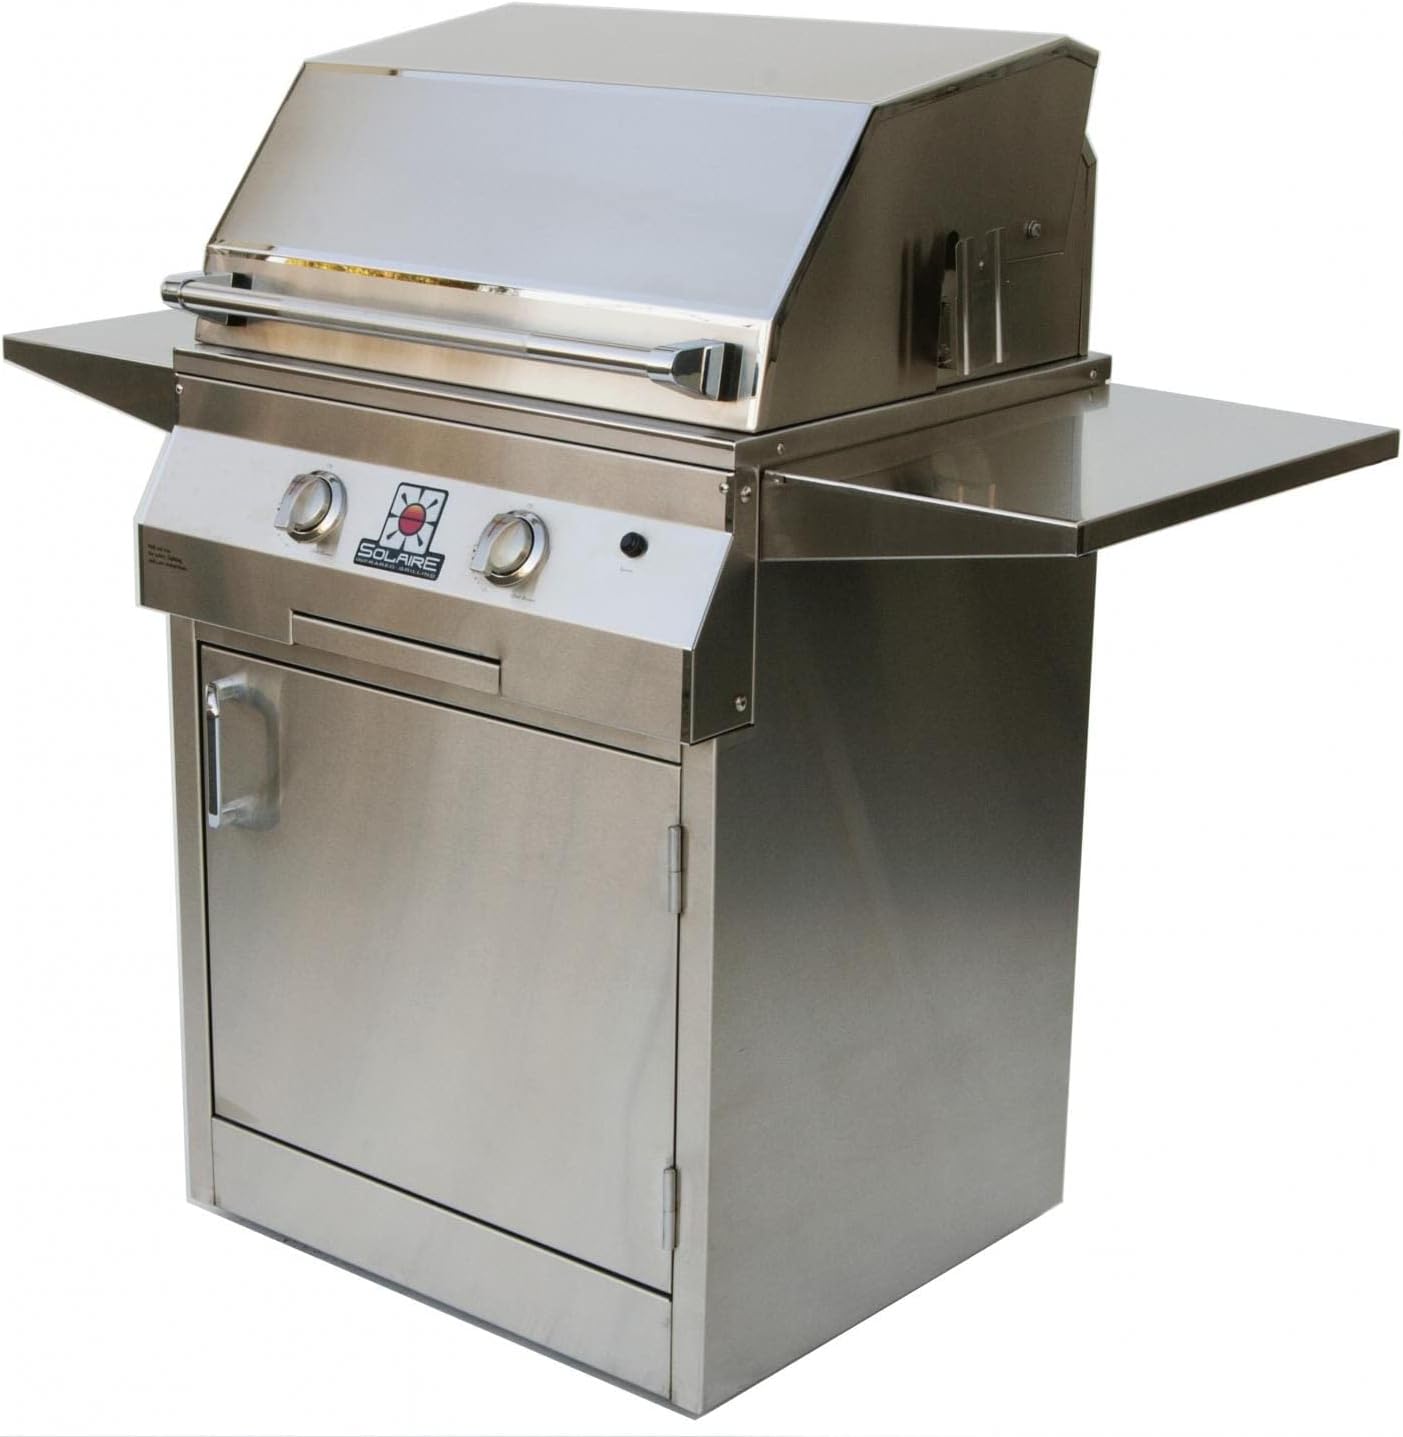 Deluxe Infrared Propane Grill Review